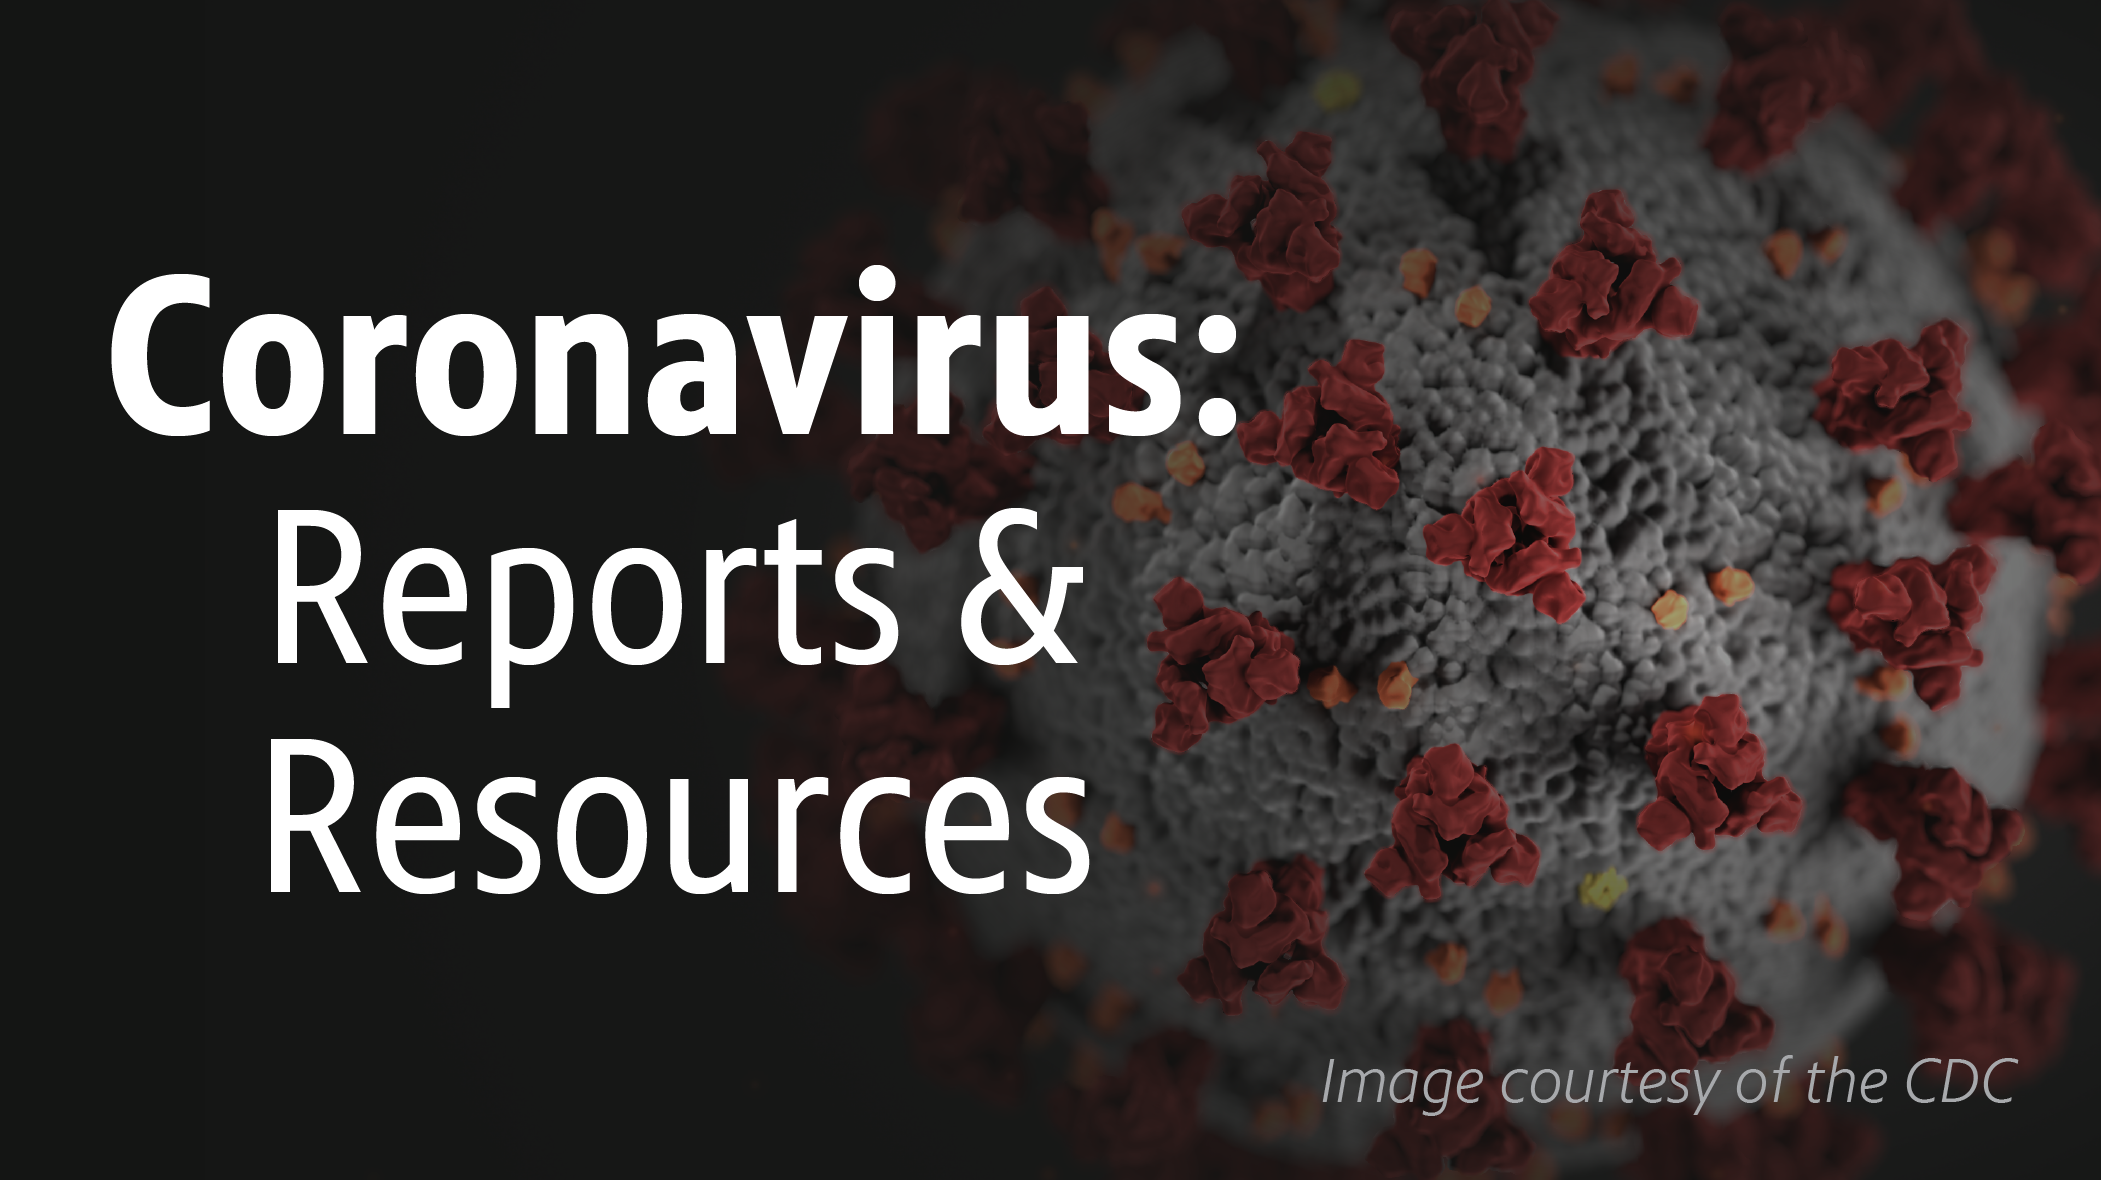 Click to view reports & resources about the coronavirus